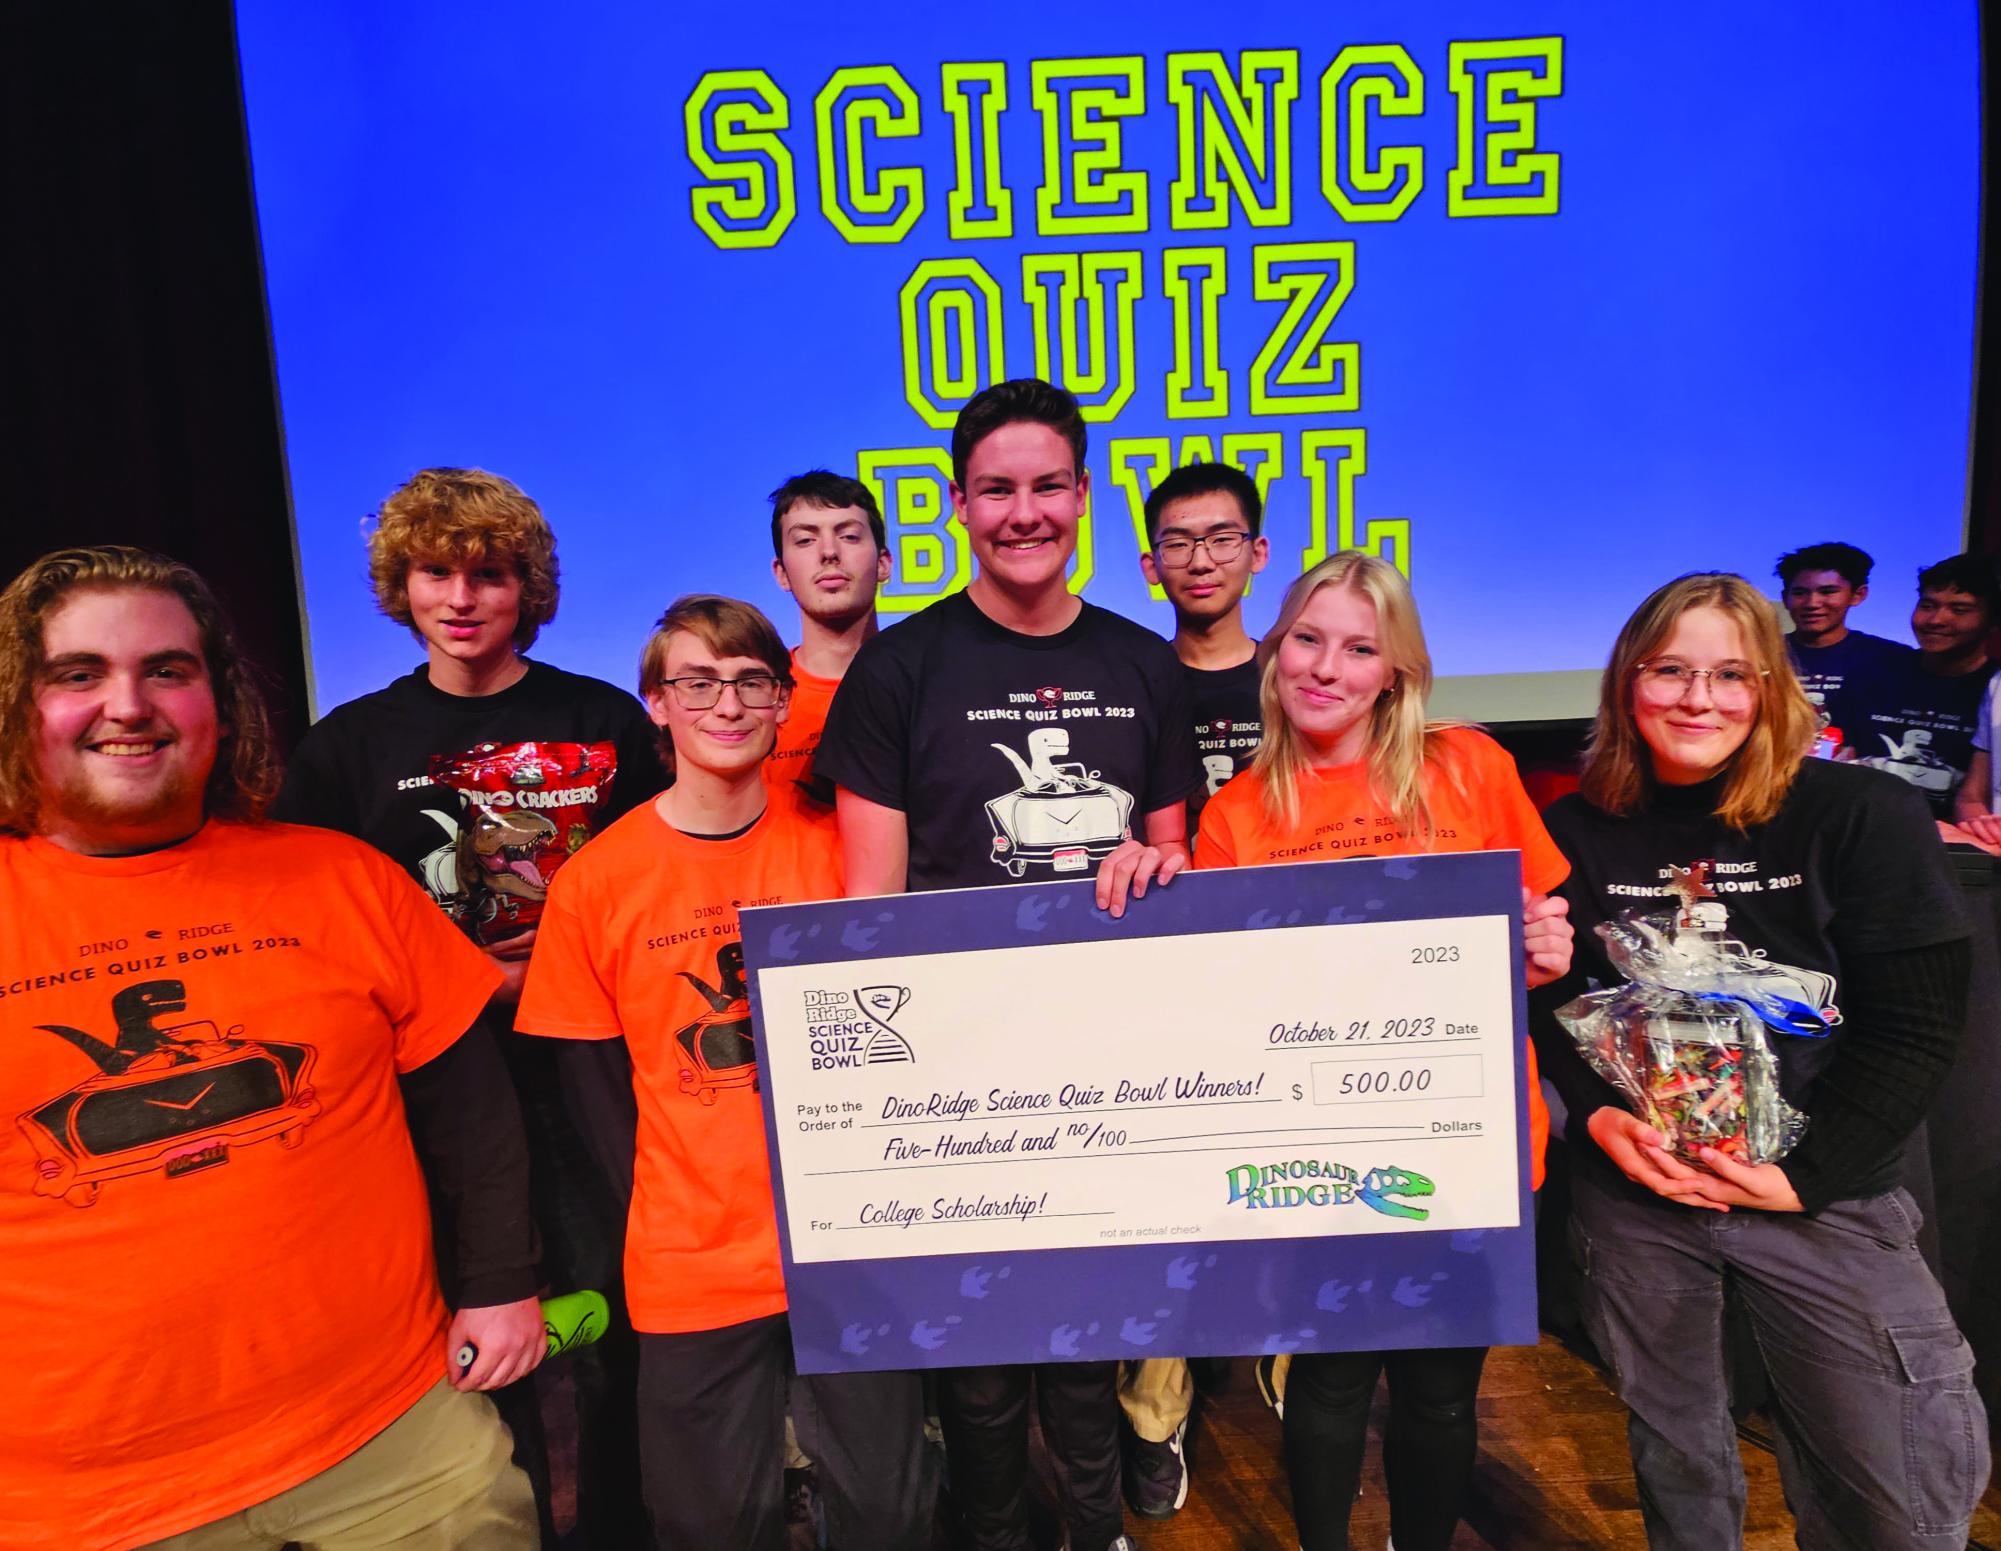 GJHS academic team received a check from Dinosaur Ridge for a college scholarship after the Science Quiz Bowl. The academic team competed in nationals last year and will be competing again this year.